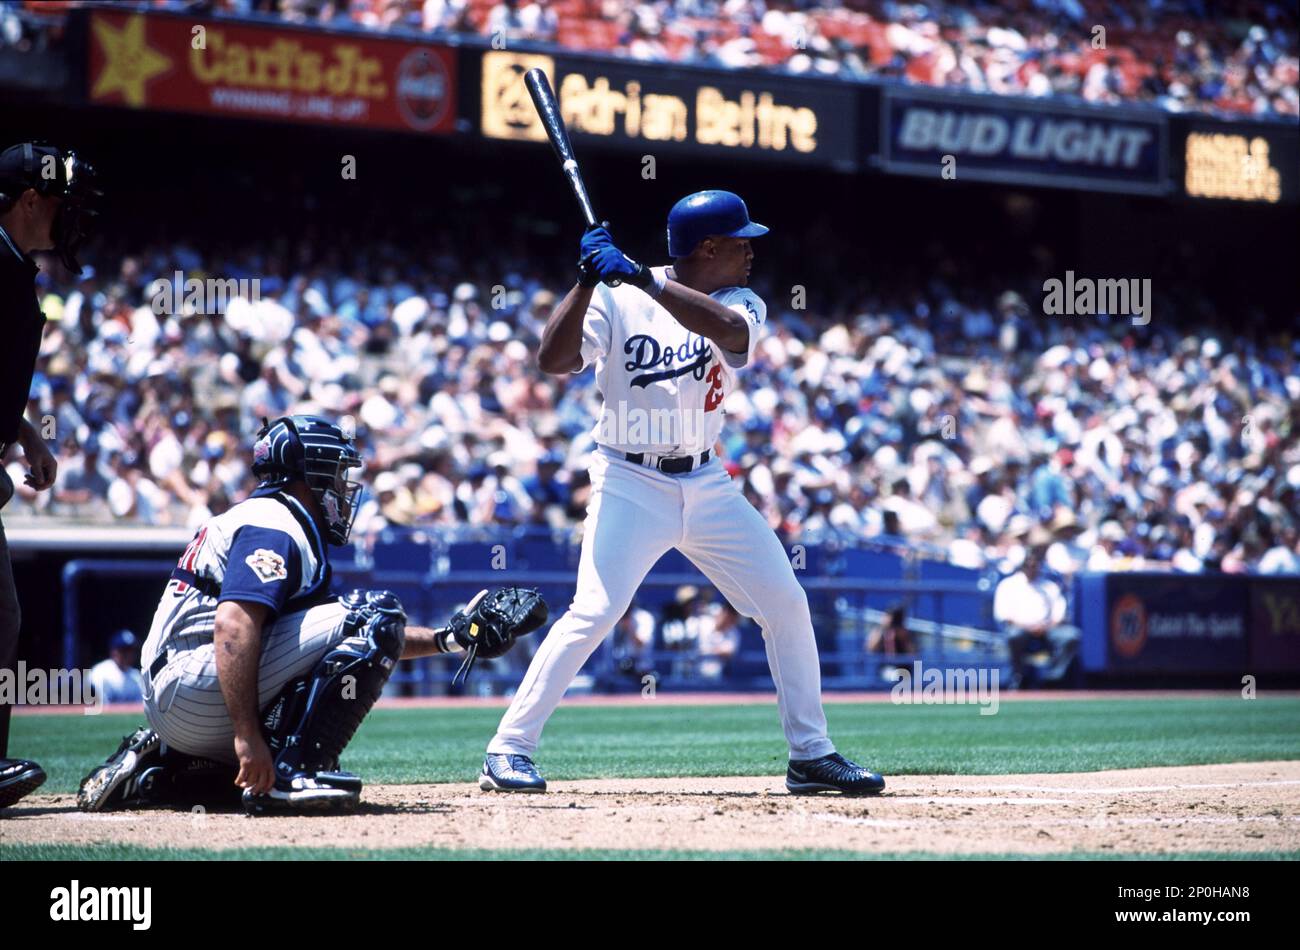 10 Jun 2001: Adrian Beltre of the Los Angeles Dodgers in action during a  game versus the Anaheim Angels at Dodger Stadium in Los Angeles, CA. (Photo  by John Cordes/Icon Sportswire) (Icon